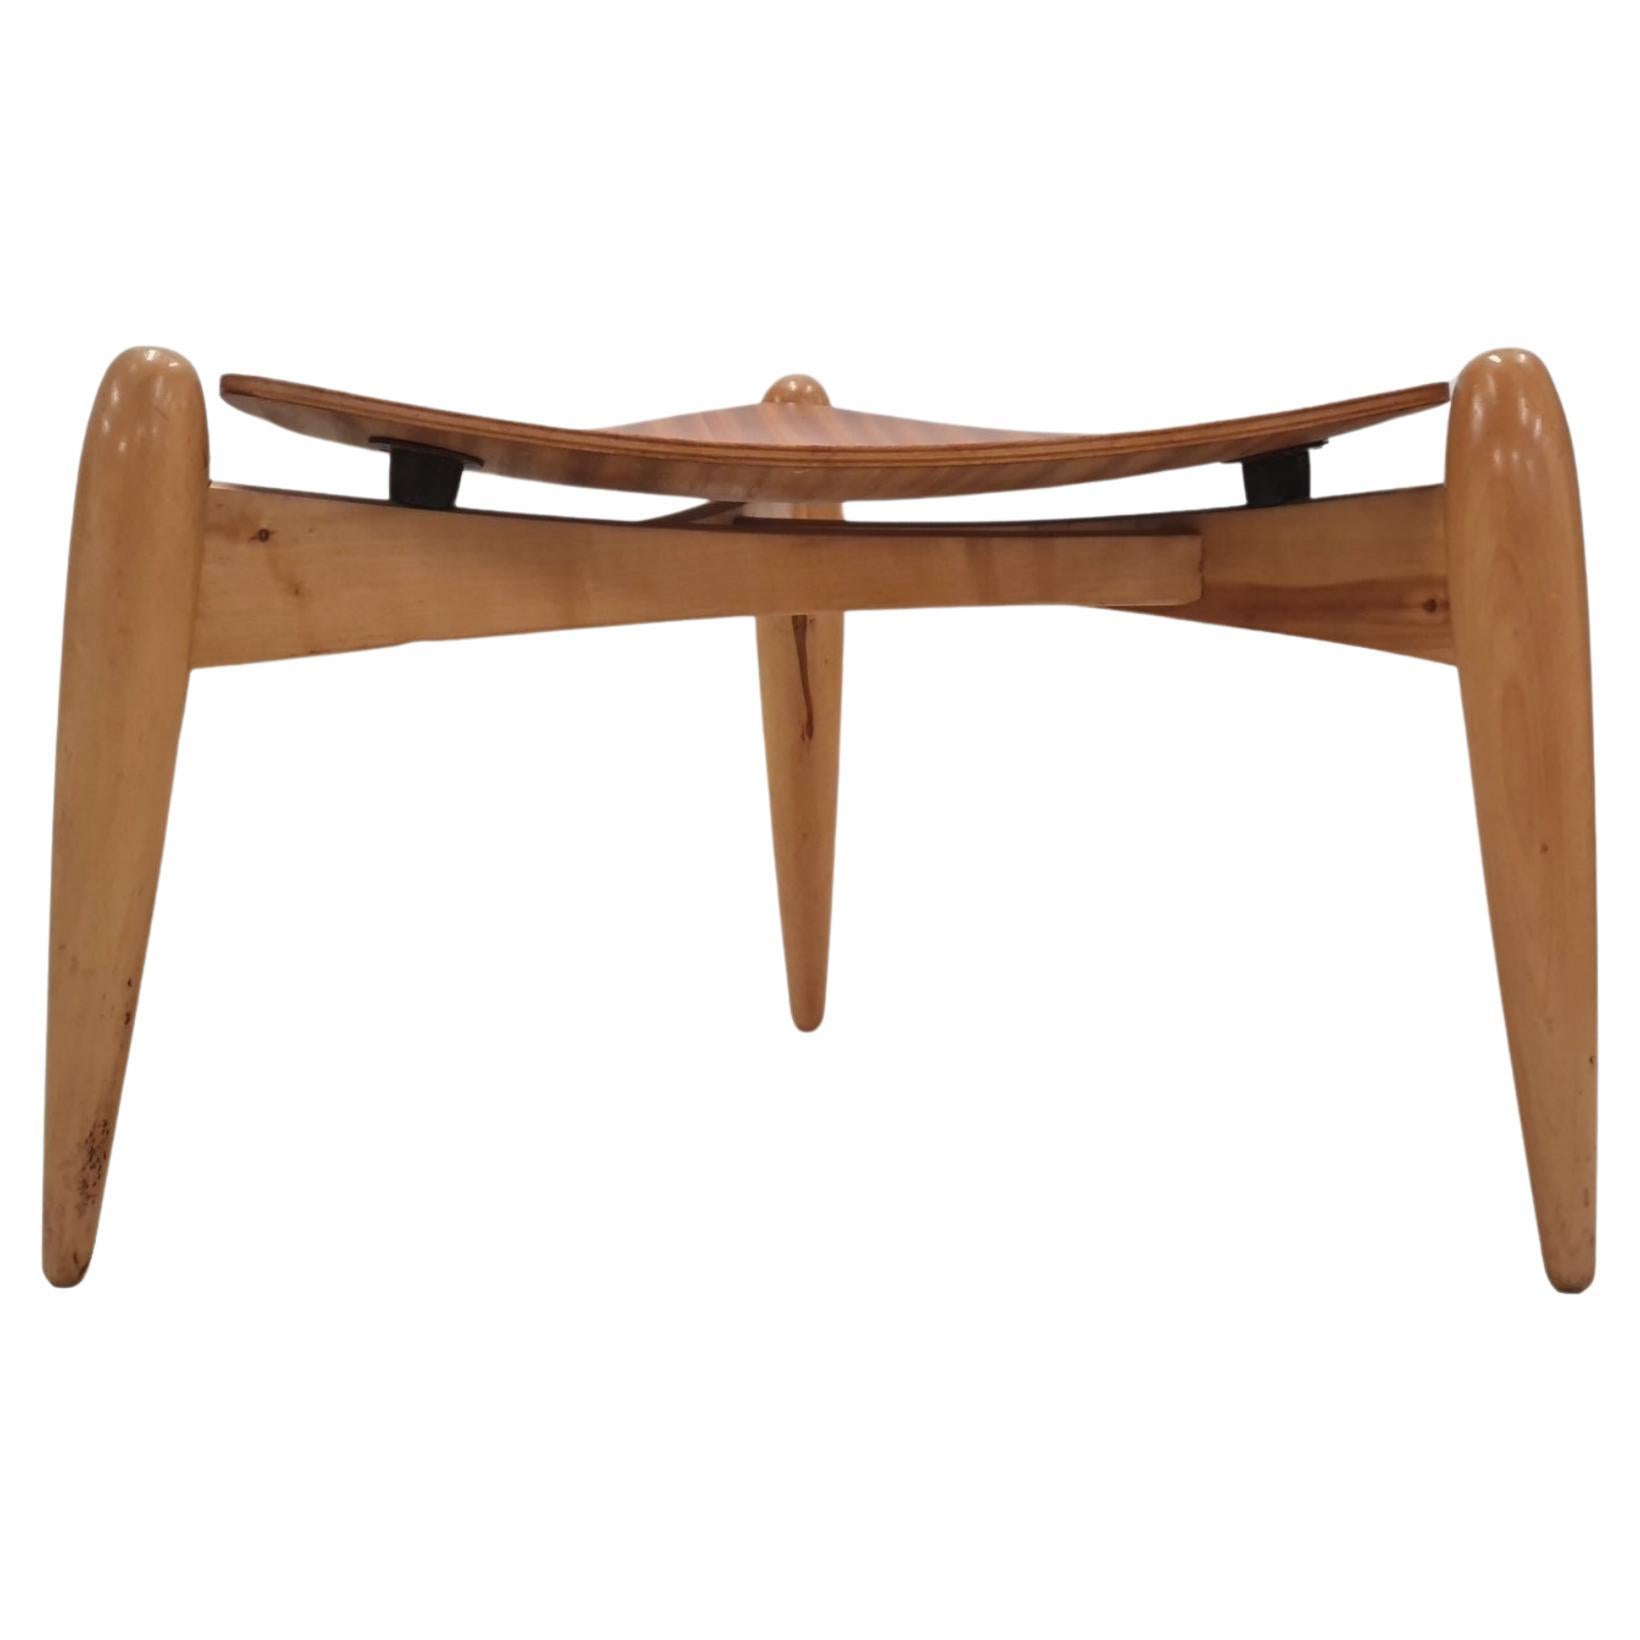 Tale stool with form-pressed plywood seat by Asko Ltd. For Sale